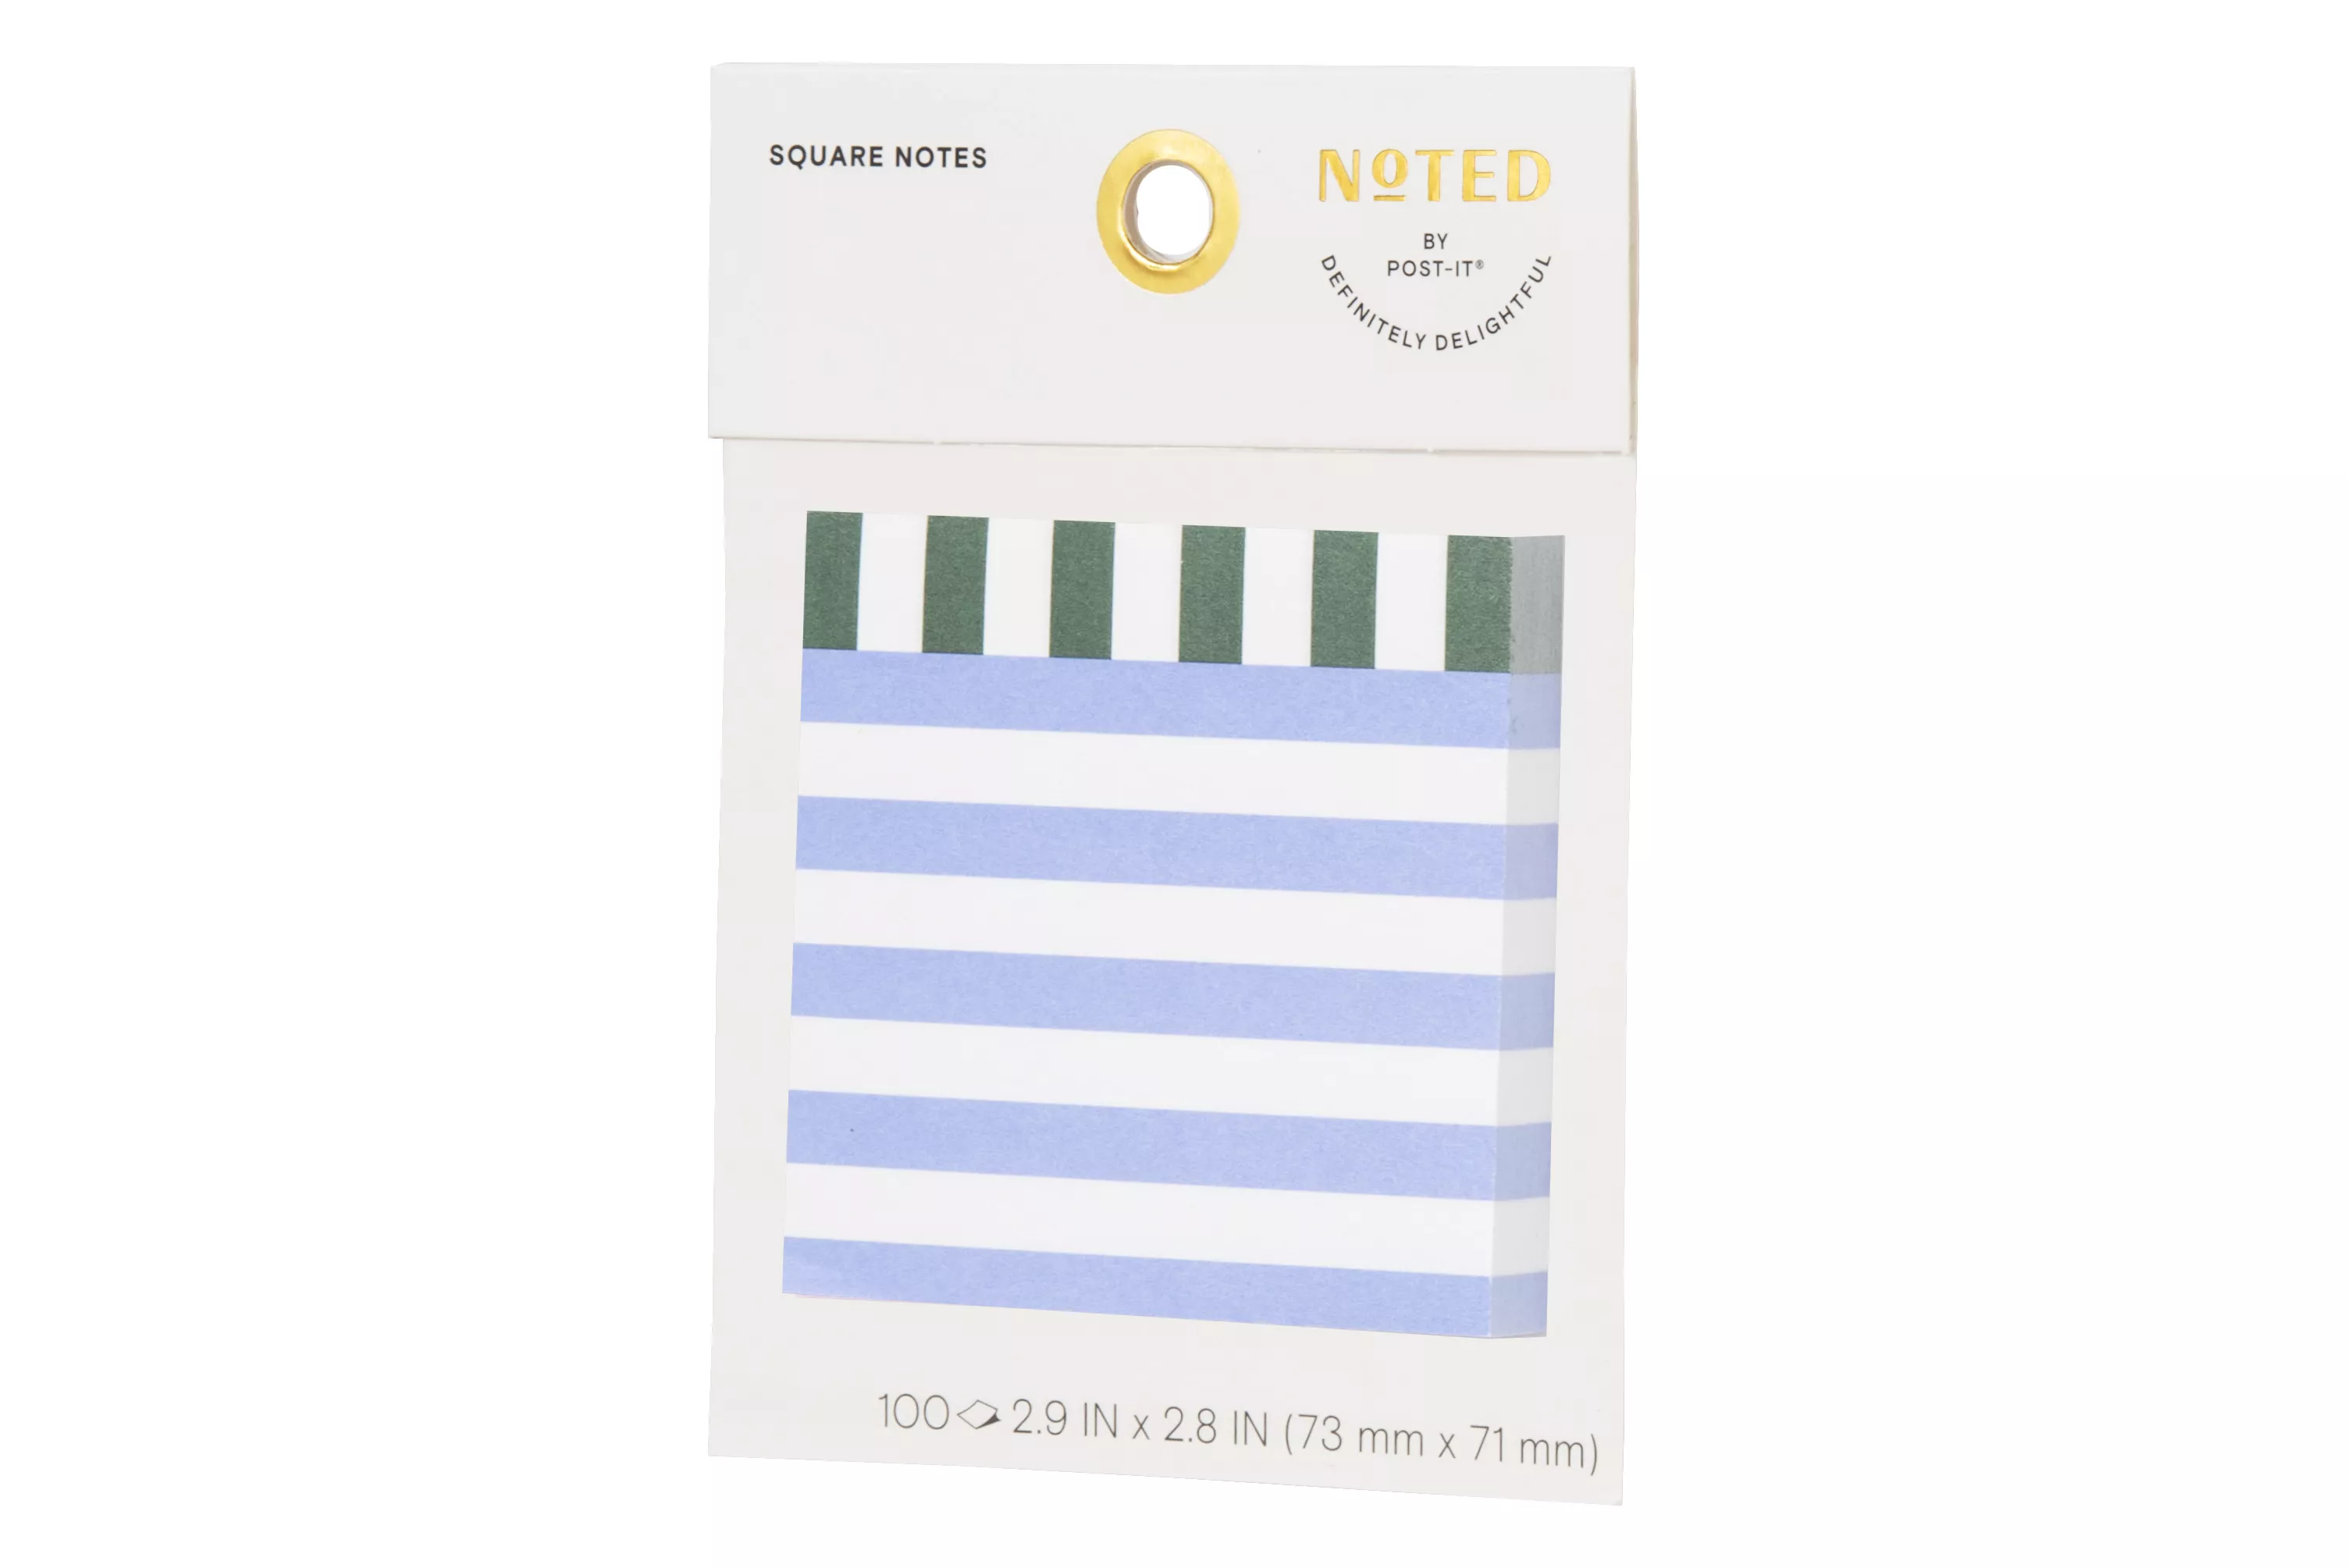 Product Number NTD6-33-1 | Post-it® Square Notes NTD6-33-1